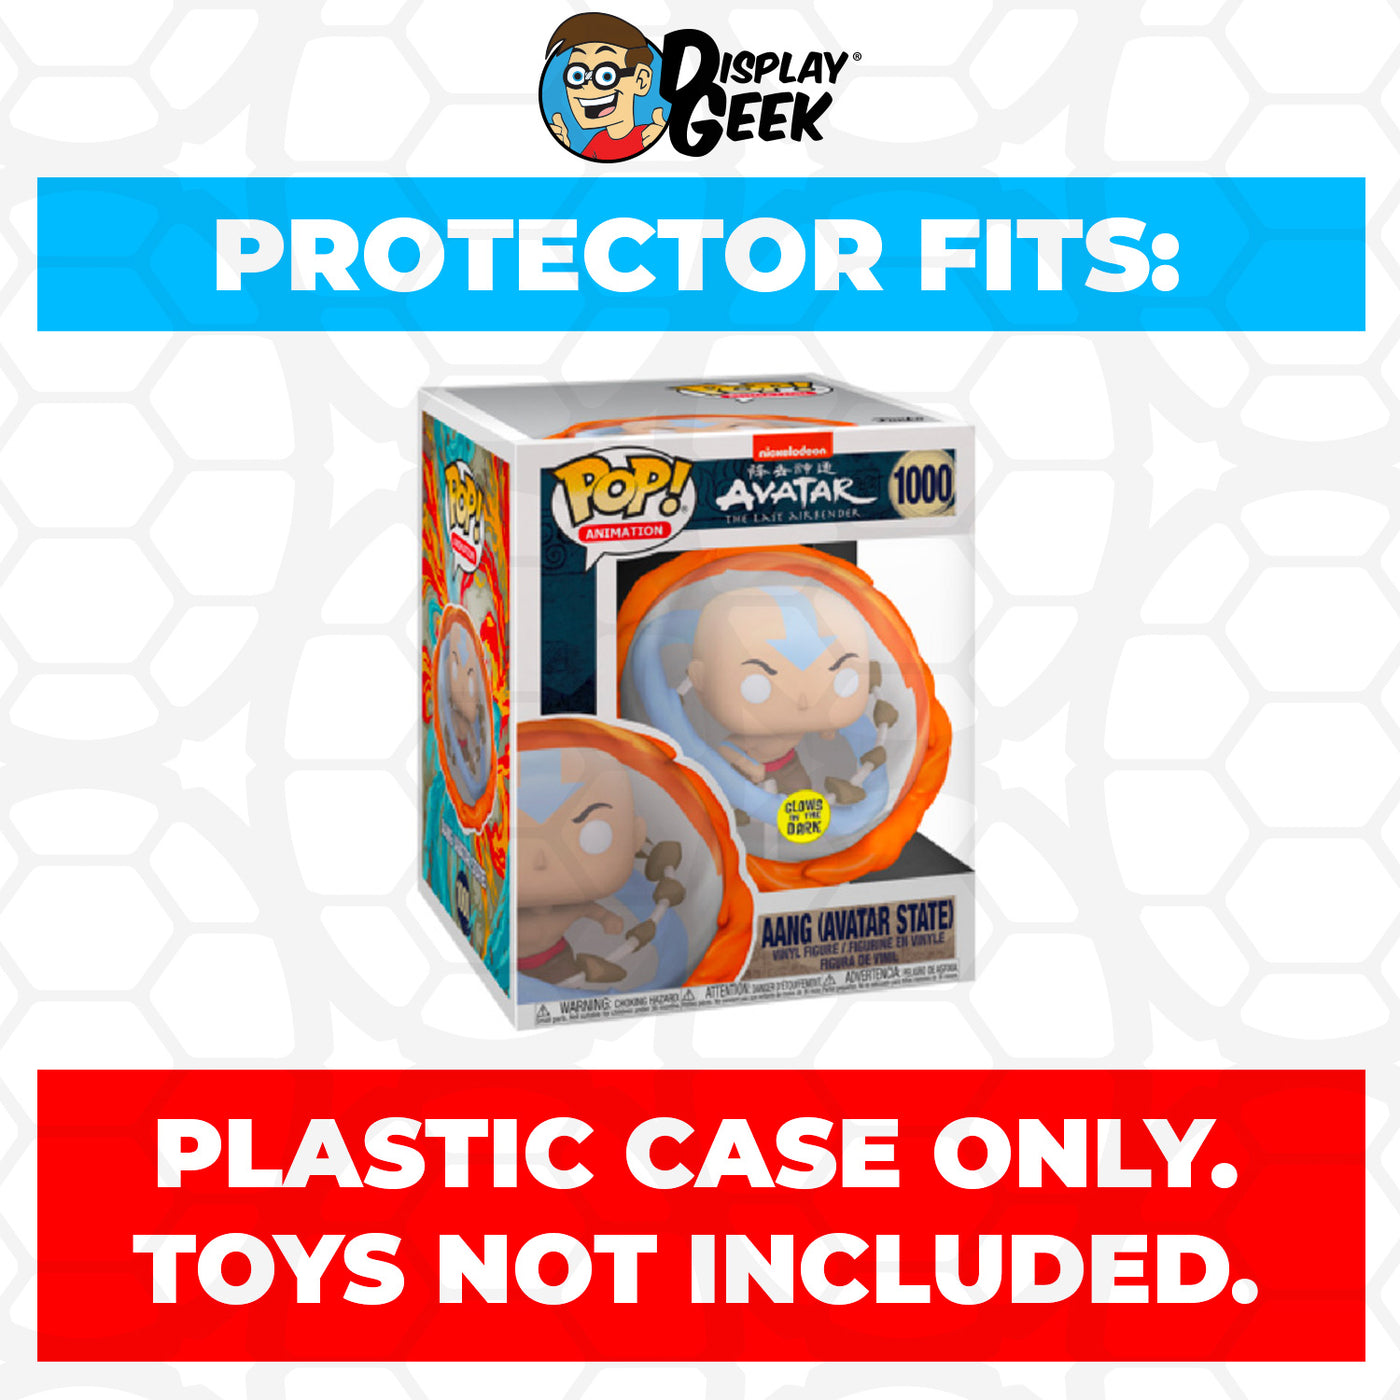 Pop Protector for 6 inch Aang Avatar State #1000 Super Funko Pop on The Protector Guide App by Display Geek